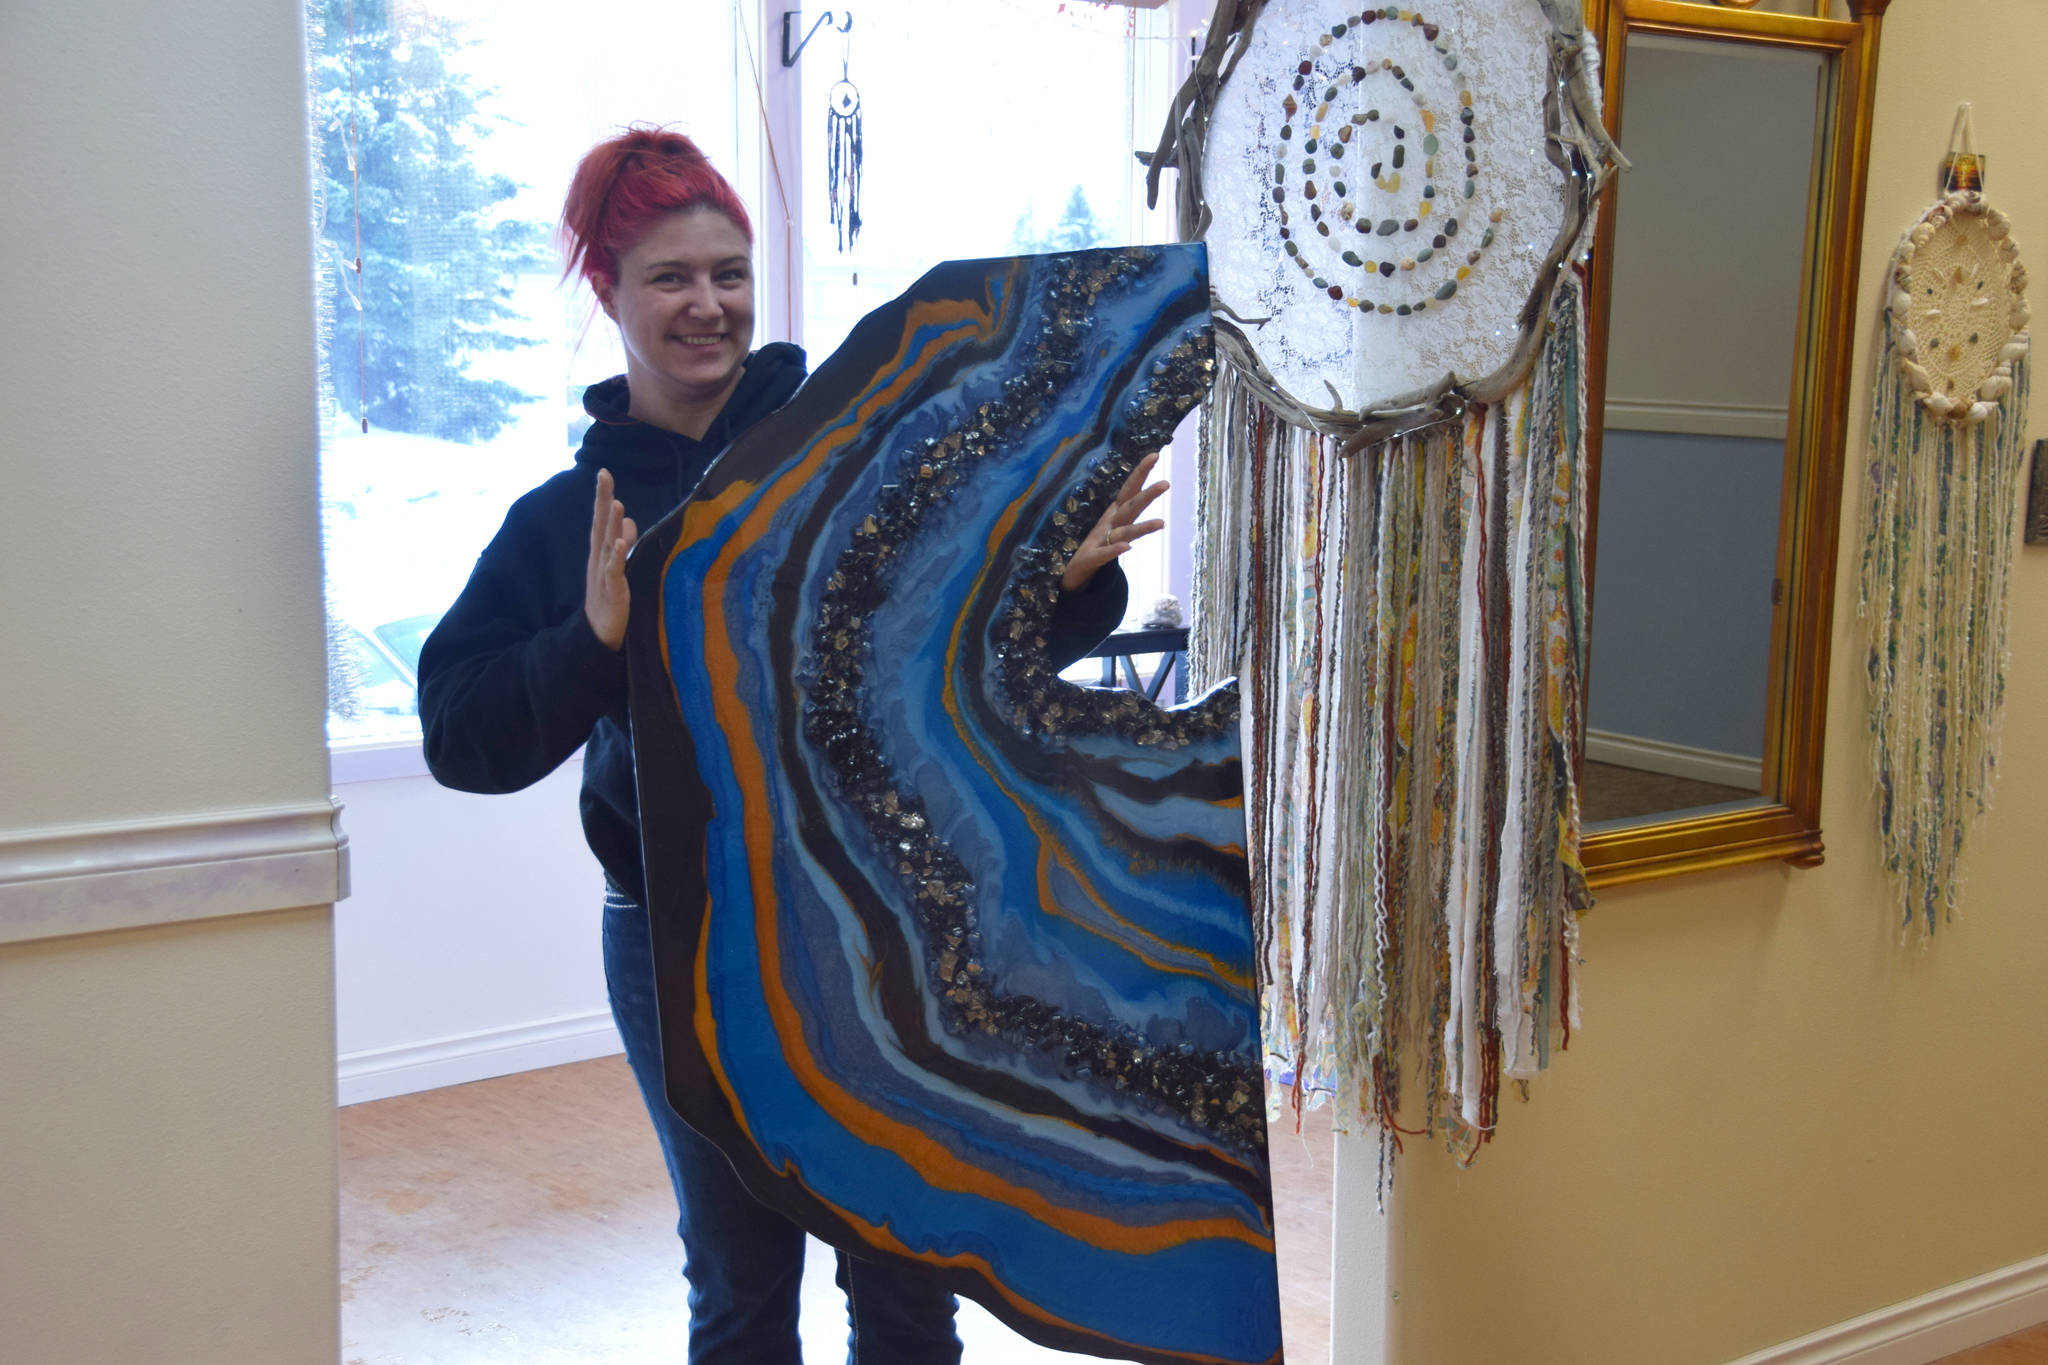 Local artist Audrey Cucullu shows off her latest piece at the Positive Vibe gallery in Kenai on Wednesday, Jan. 30, 2019. (Photo by Brian Mazurek/Peninsula Clarion)